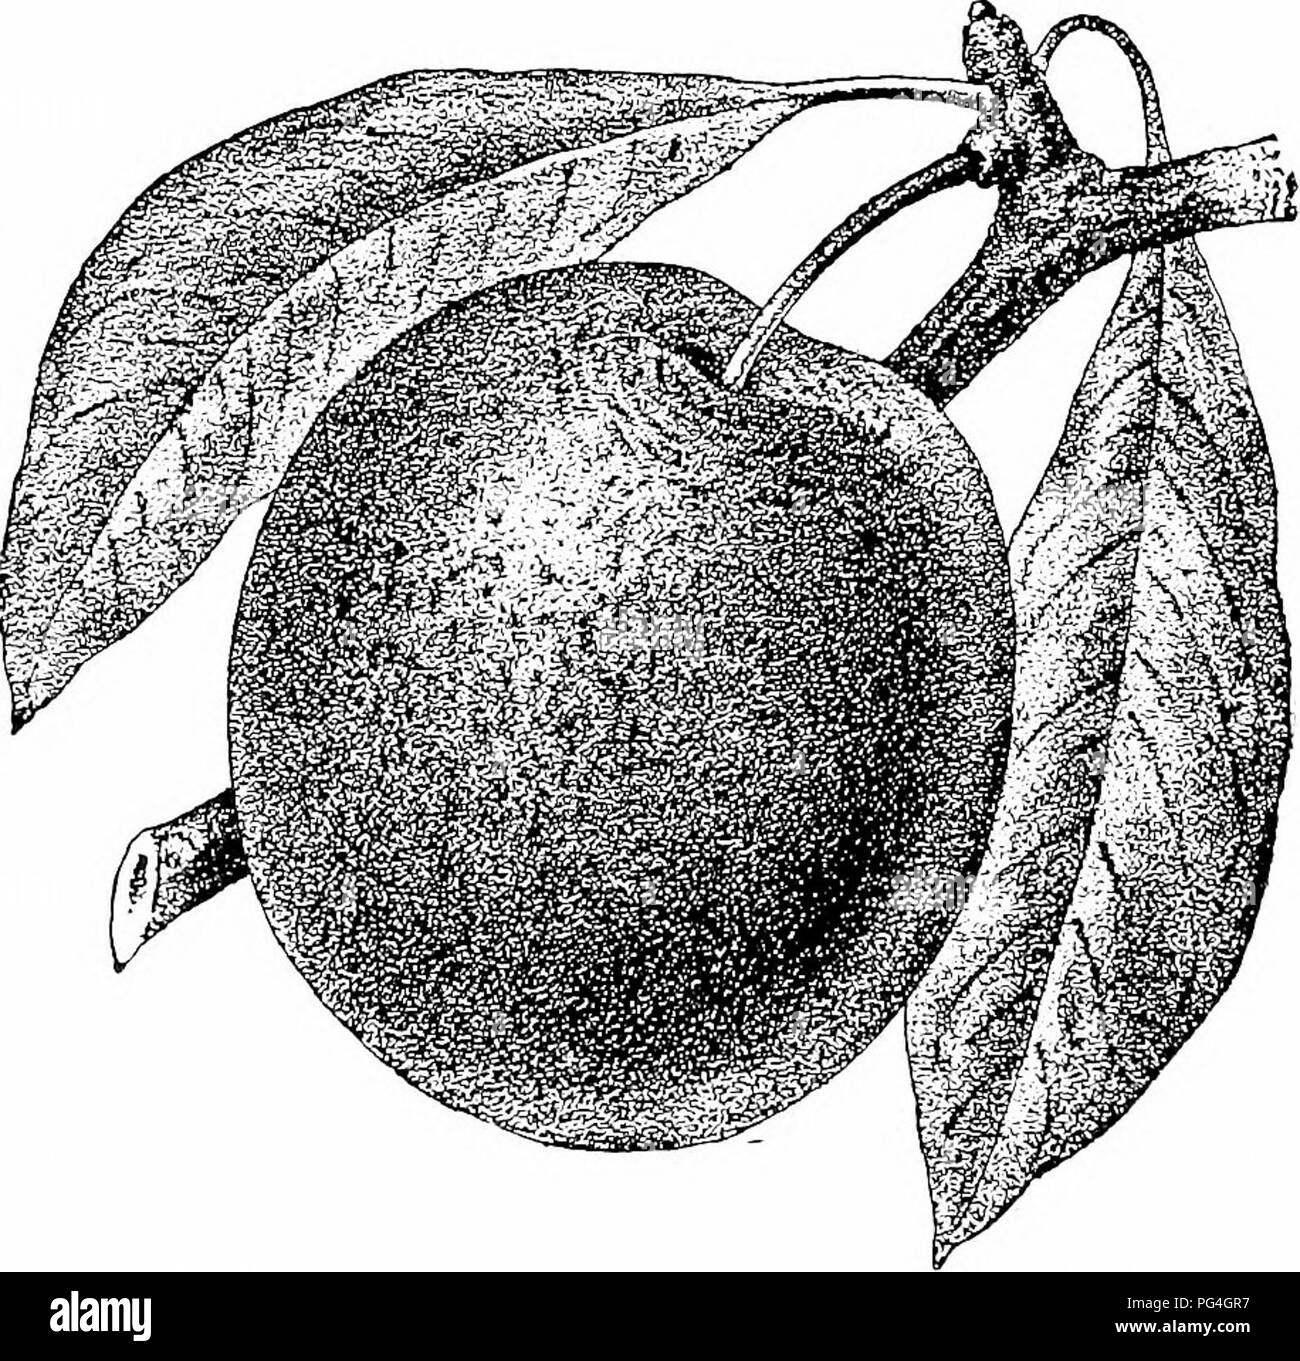 . Guide to hardy fruits and ornamentals . Fruit-culture. 36 DWYEES GUIDE. Plum. Long-cordate, or oblong pointed; flesh firm, deep amber yellow, clinging to the small pit. Of first quality. An excellent keeper. A cross of Burbank with Kelsey, Burbank furnishing the seed. Ripens middle of September. One of the best Plums in cultivation. PLUMS FOR PROFIT. The author has for several years fruited many varieties of the Japan Plums in a large way, having several hundred trees under cultivation. They have been a satisfactory and profitable crop at all times. Our profits from them have been as large a Stock Photo